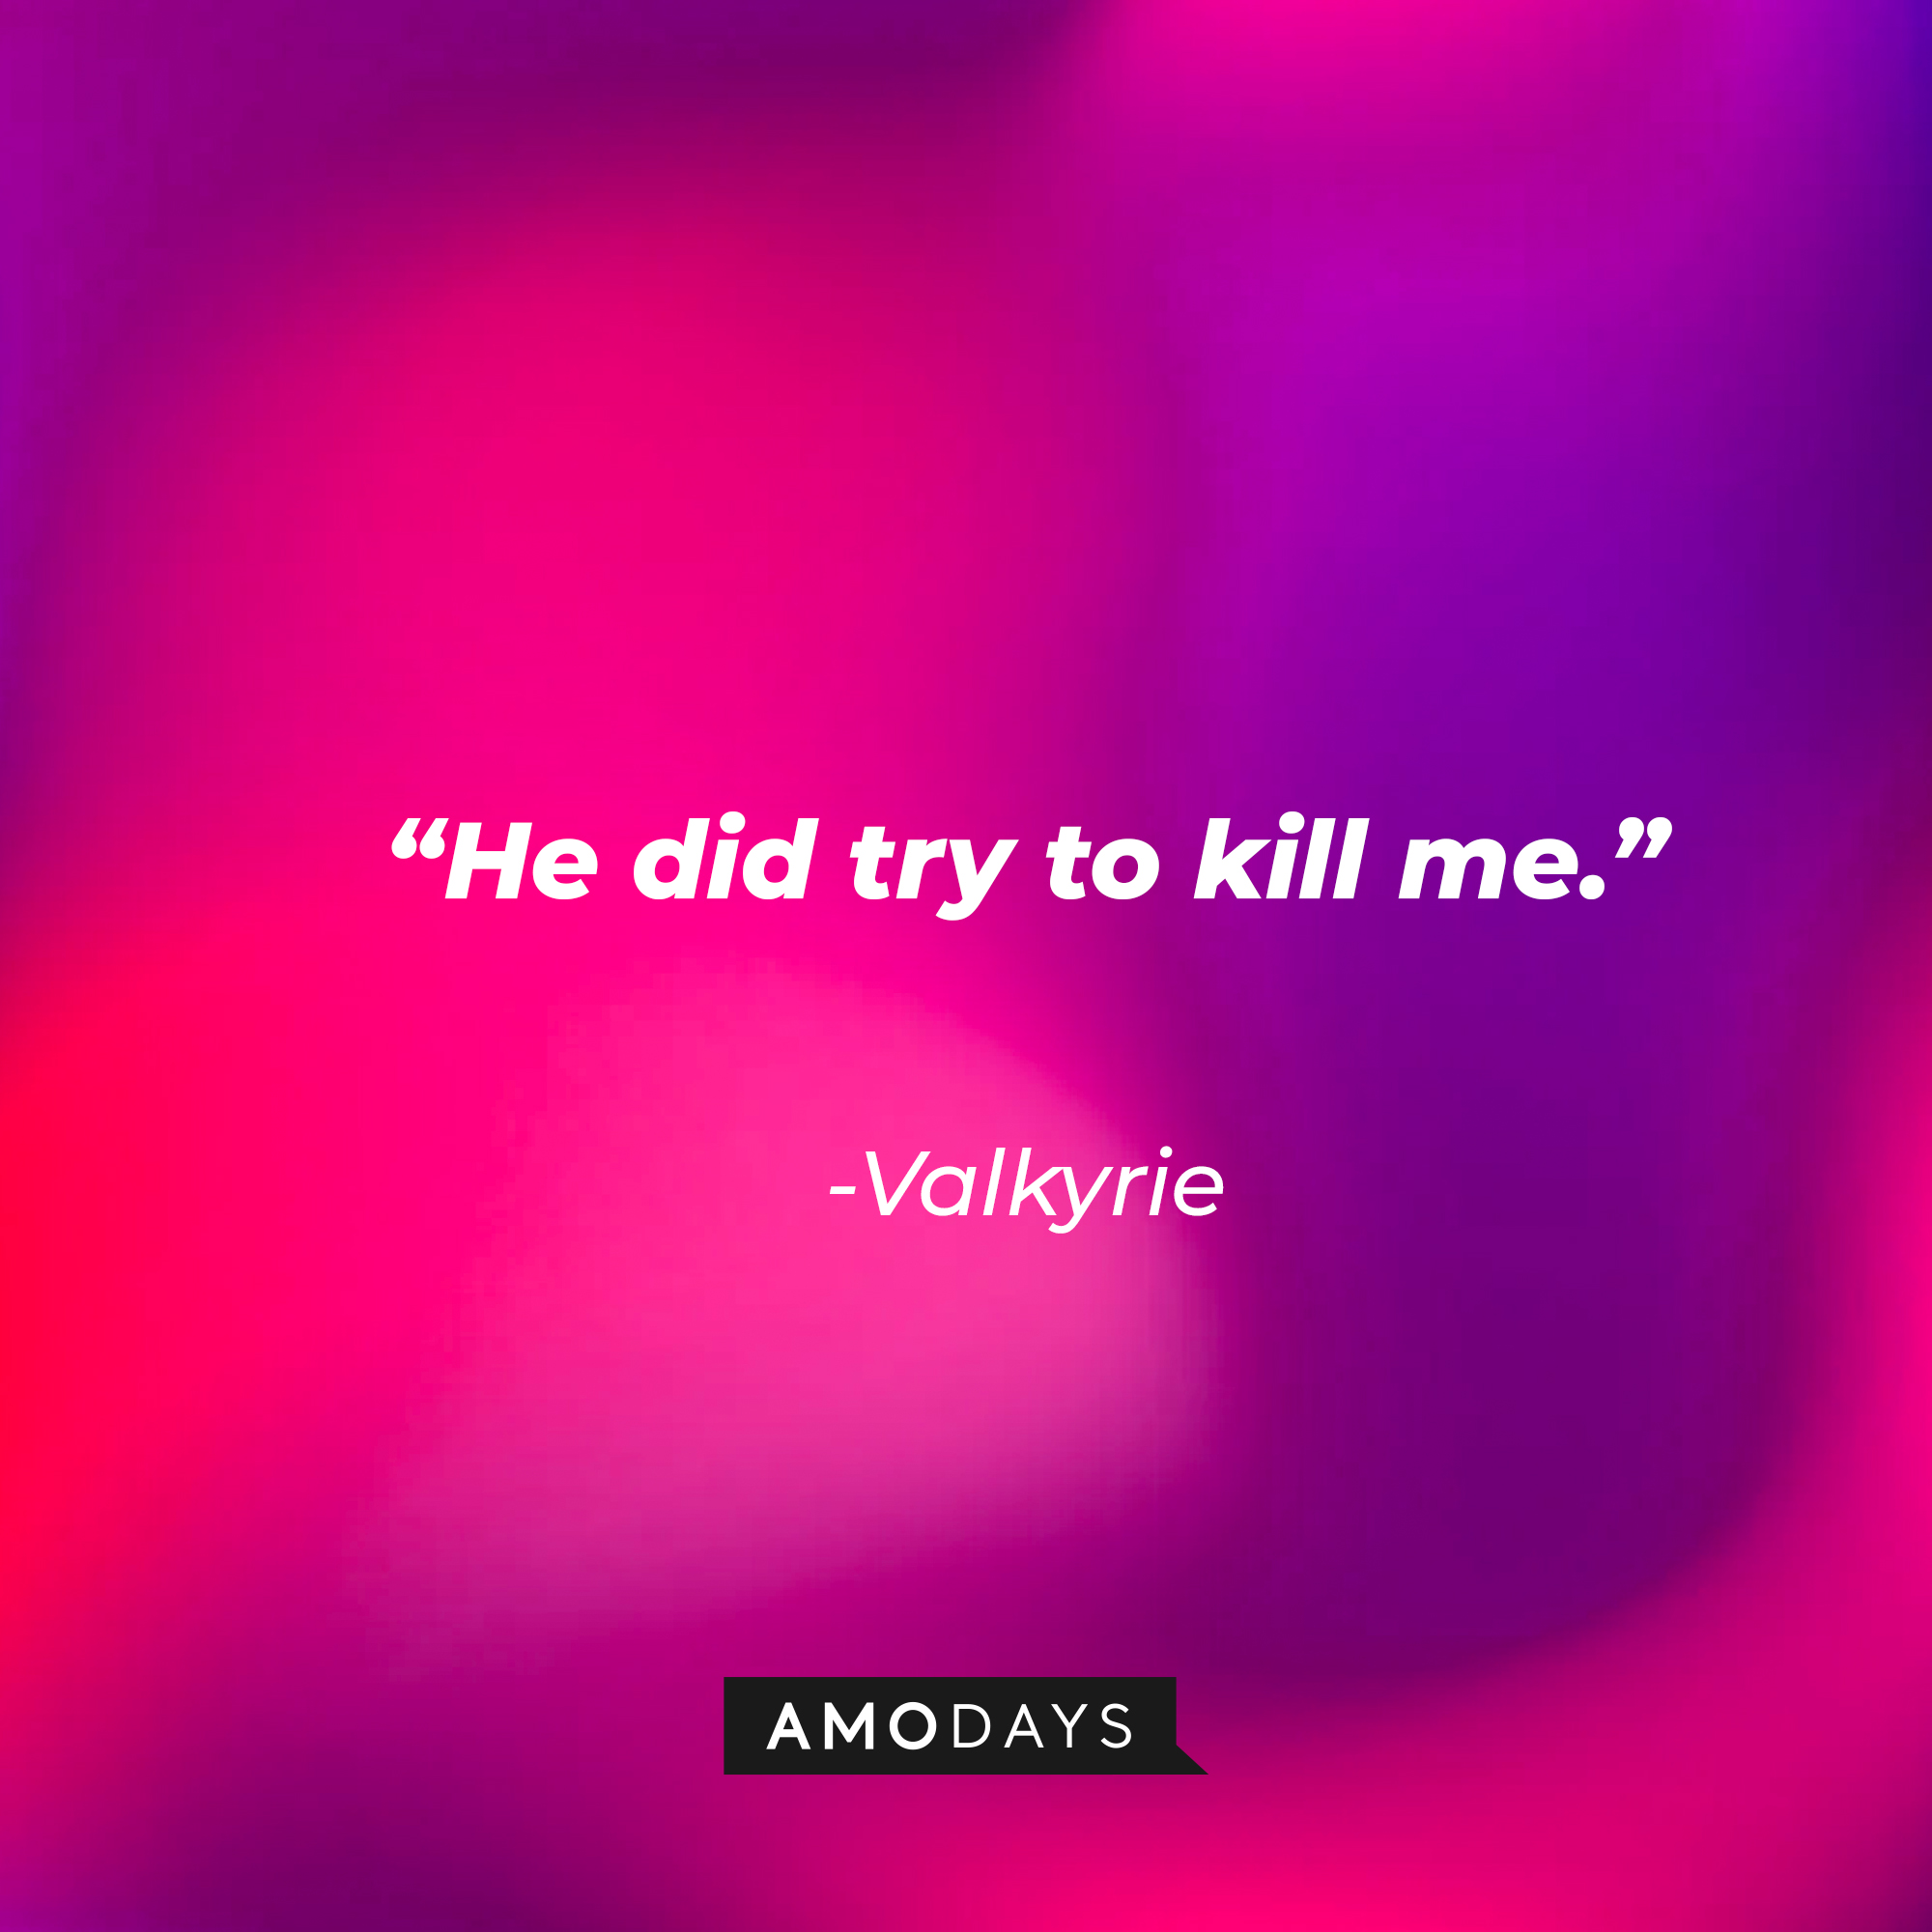 Valkyrie's quote: “He did try to kill me.” | Source: Amodays